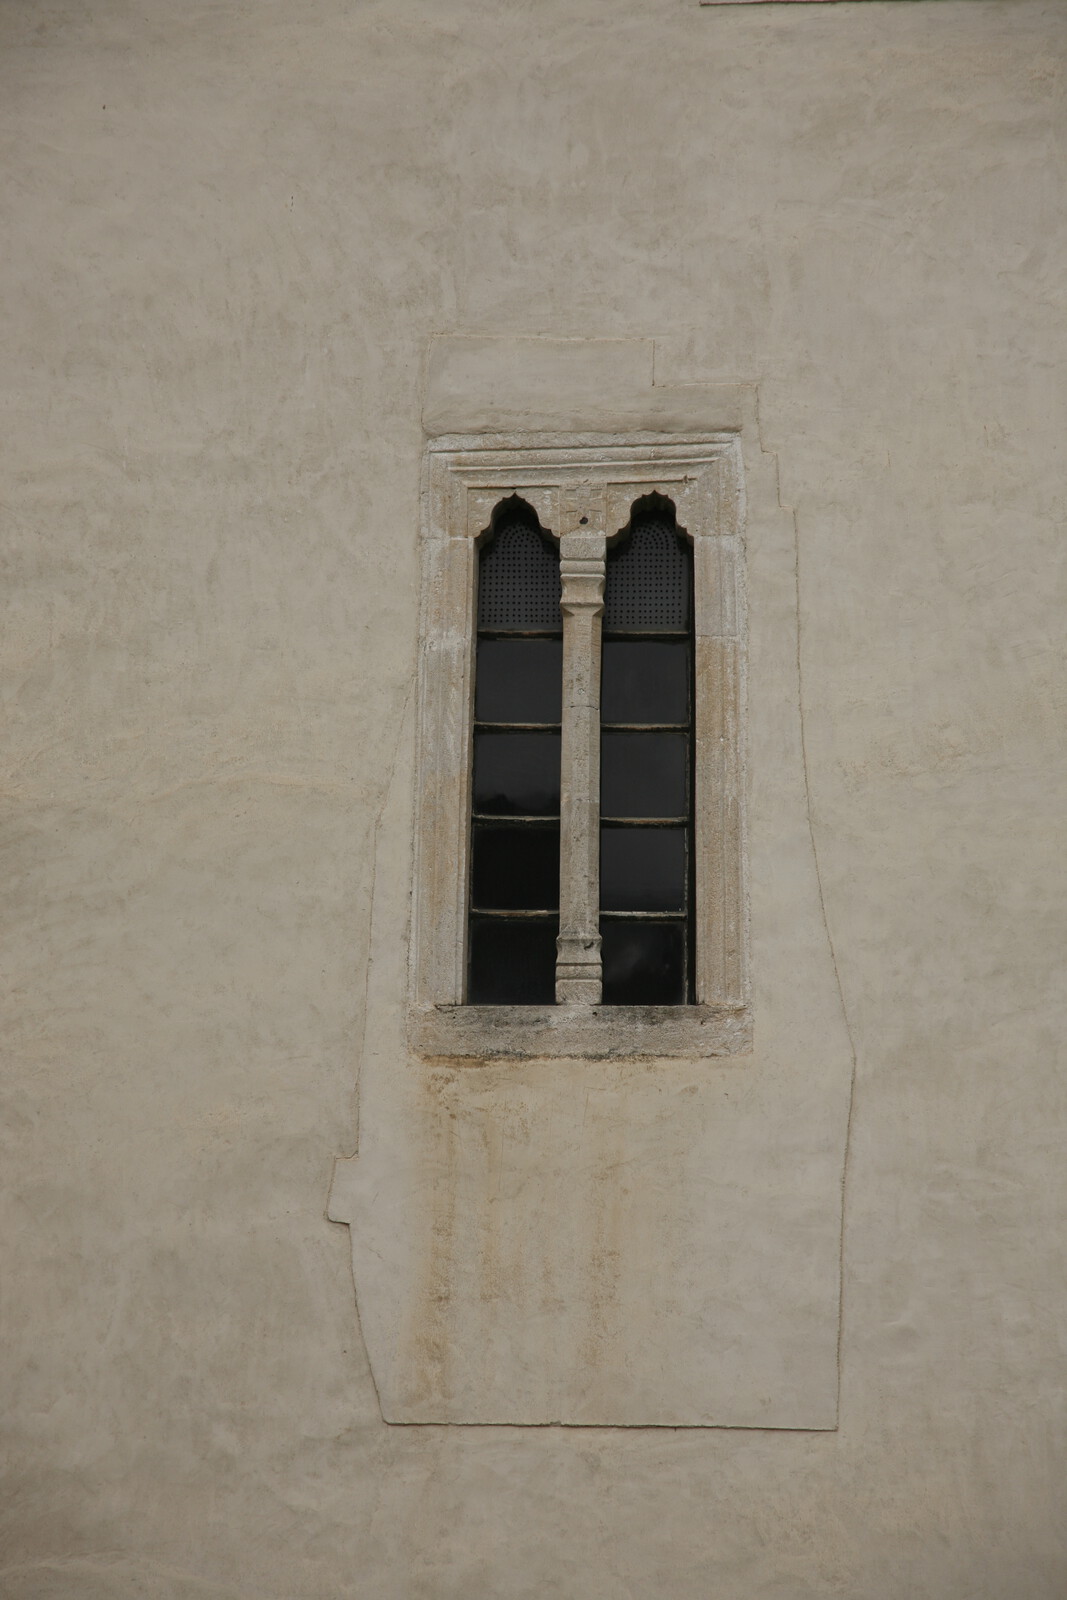 Mullioned window (bifora) on the southern wall of the narthex